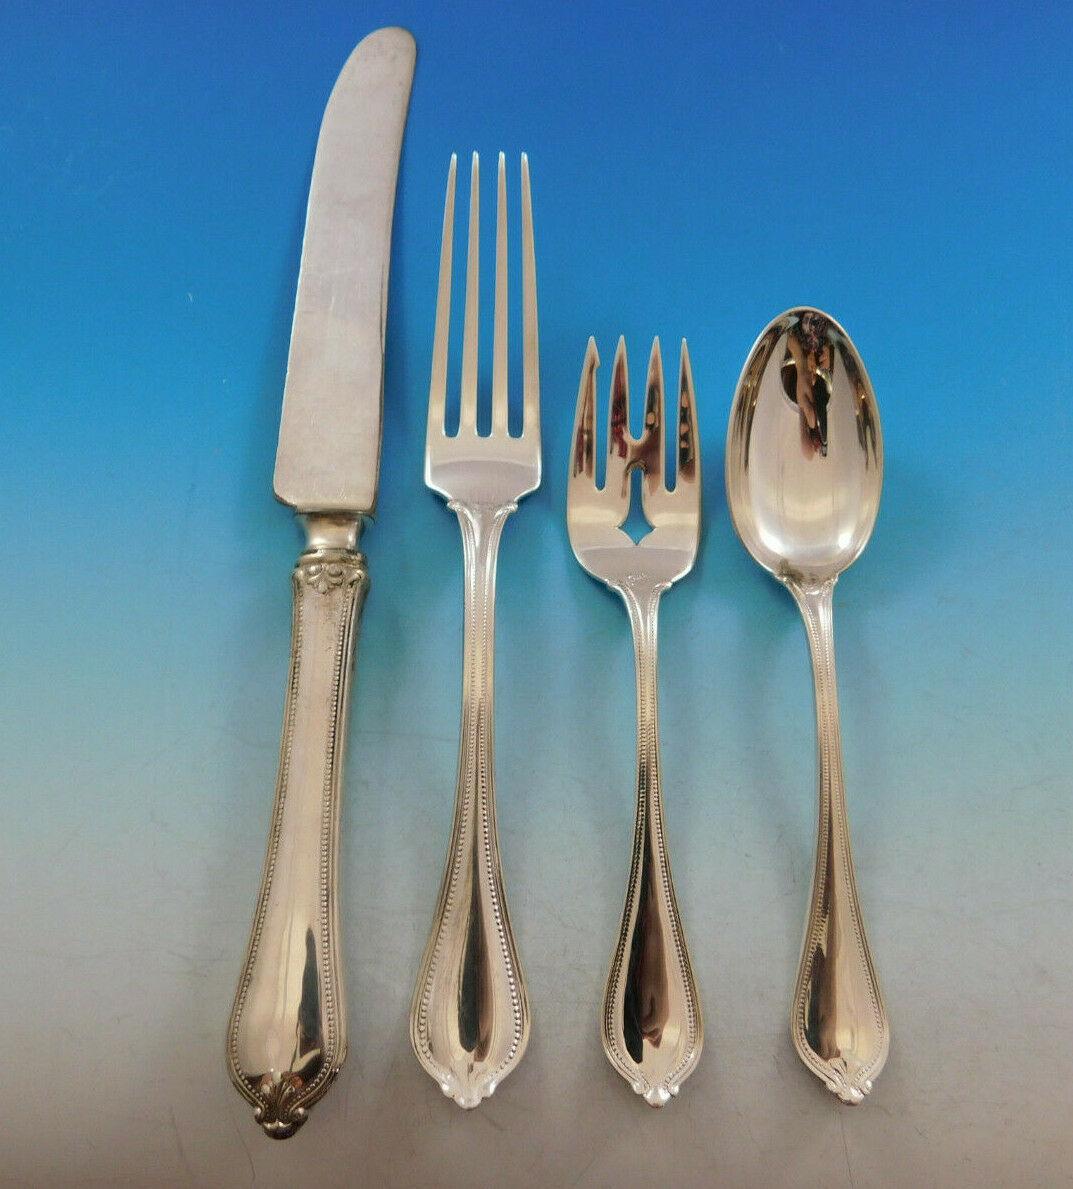 Monumental dinner size Old Newbury by Towle sterling silver flatware set, 153 pieces. This set includes:

12 dinner size knives, 9 3/4